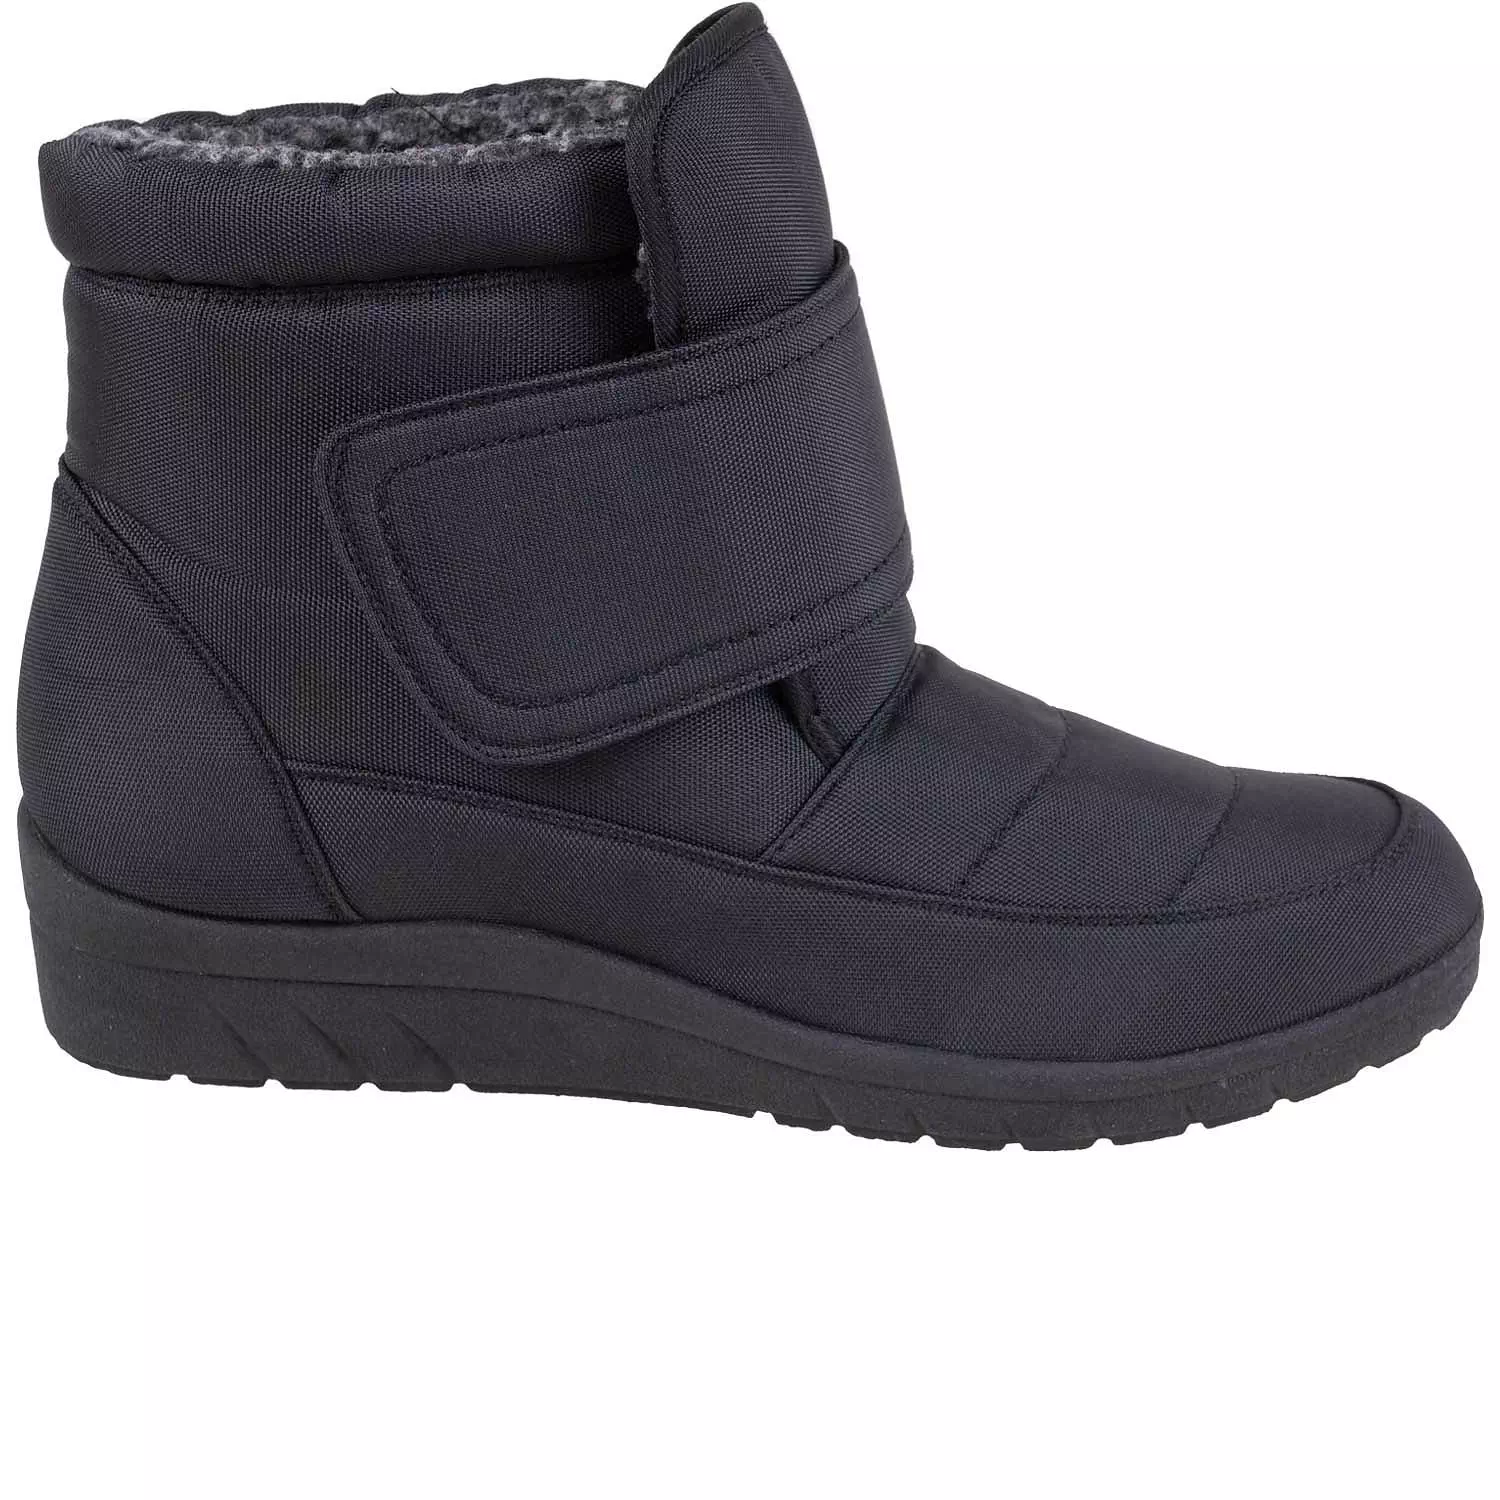 Women's canvas winter ankle boots with velcro strap, black, size 5